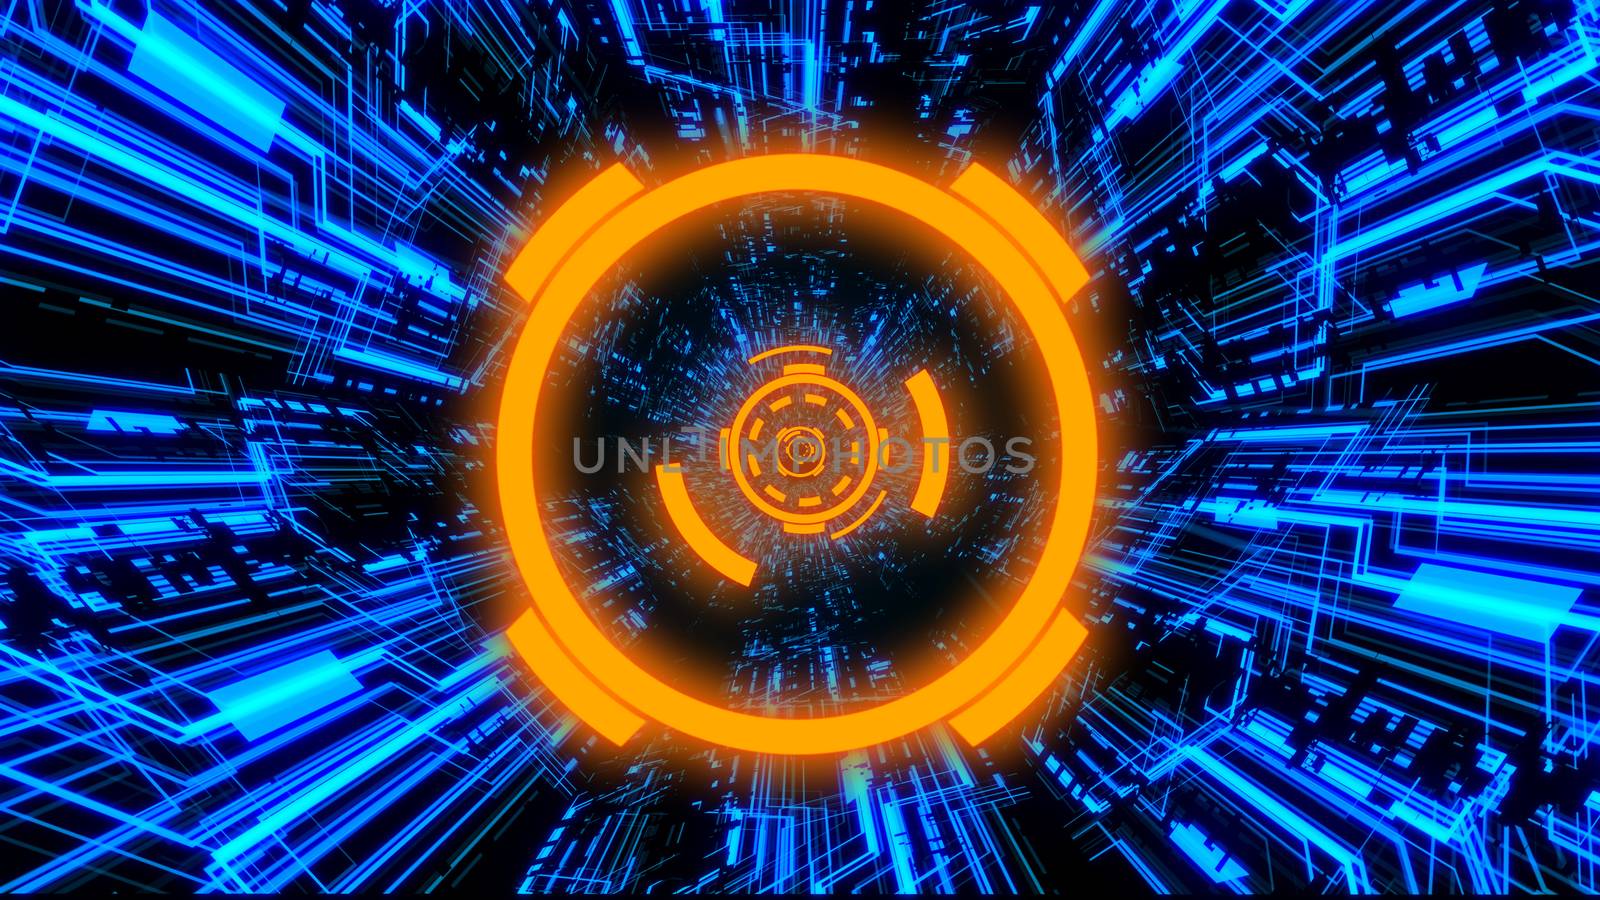 3D Digital Circuit System Tunnels and Waves with Digital Circles in the middle in Orange-Blue color theme Background Ver.2